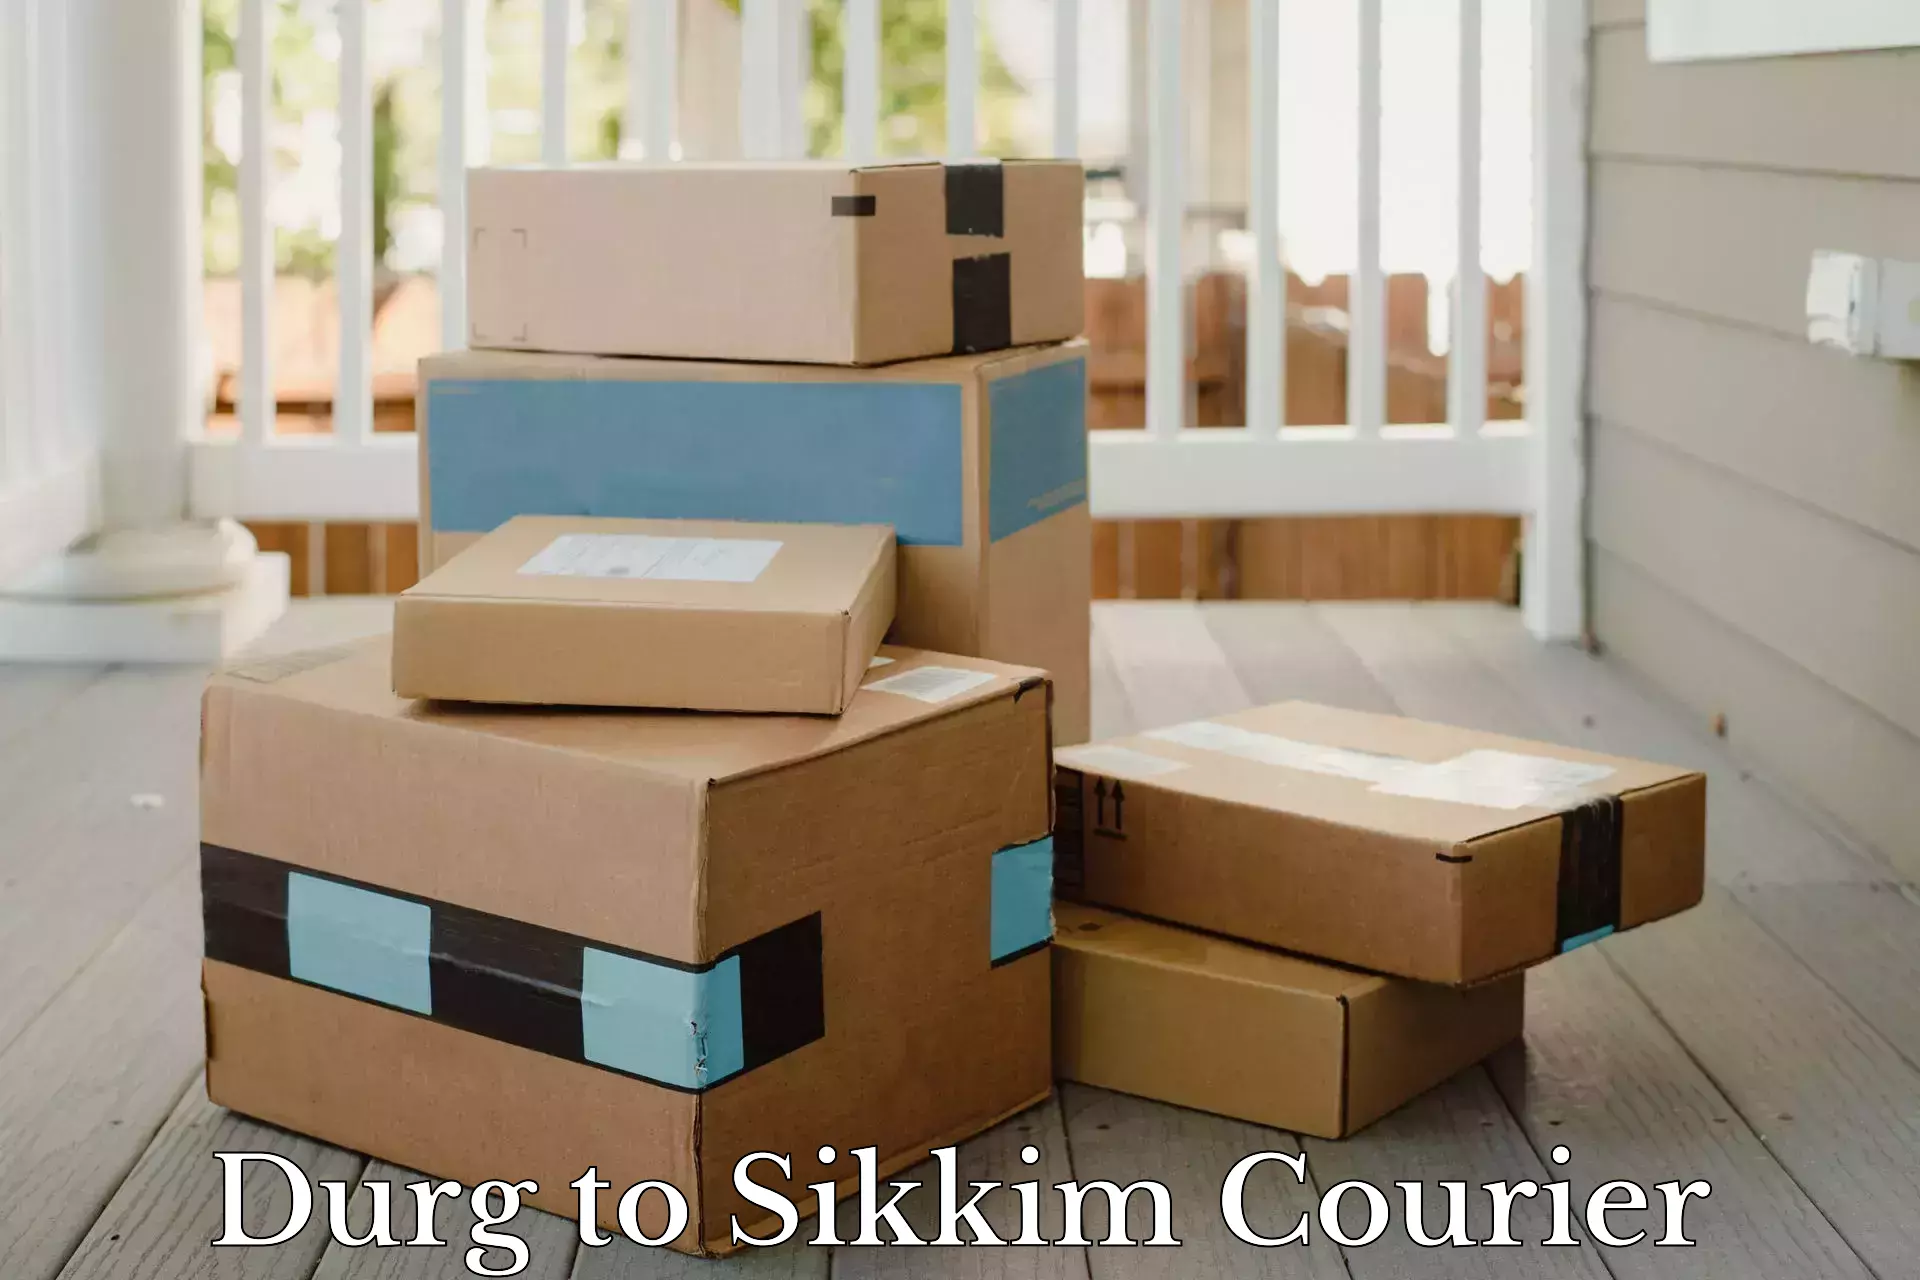 Business delivery service Durg to Sikkim